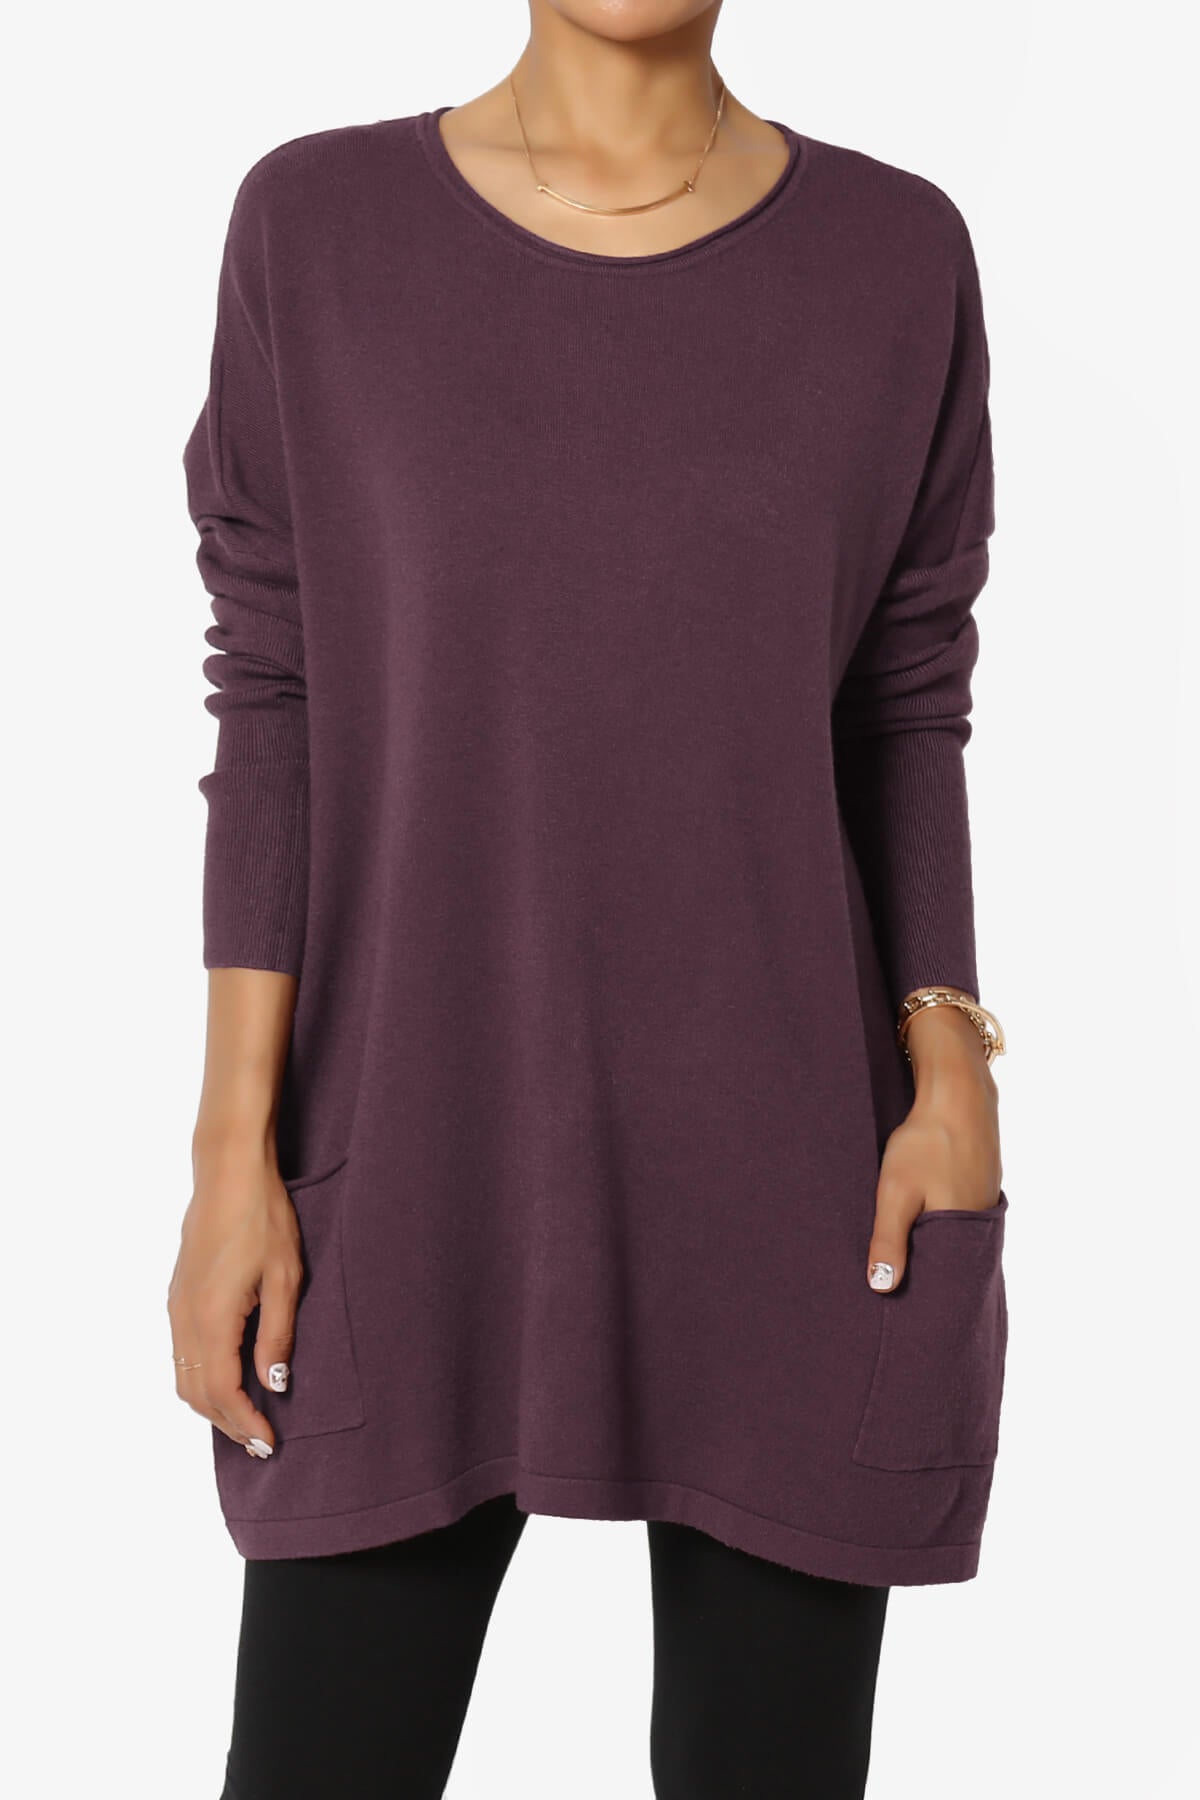 Load image into Gallery viewer, Brendi Super Soft Pocket Oversized Sweater DUSTY PLUM_1
